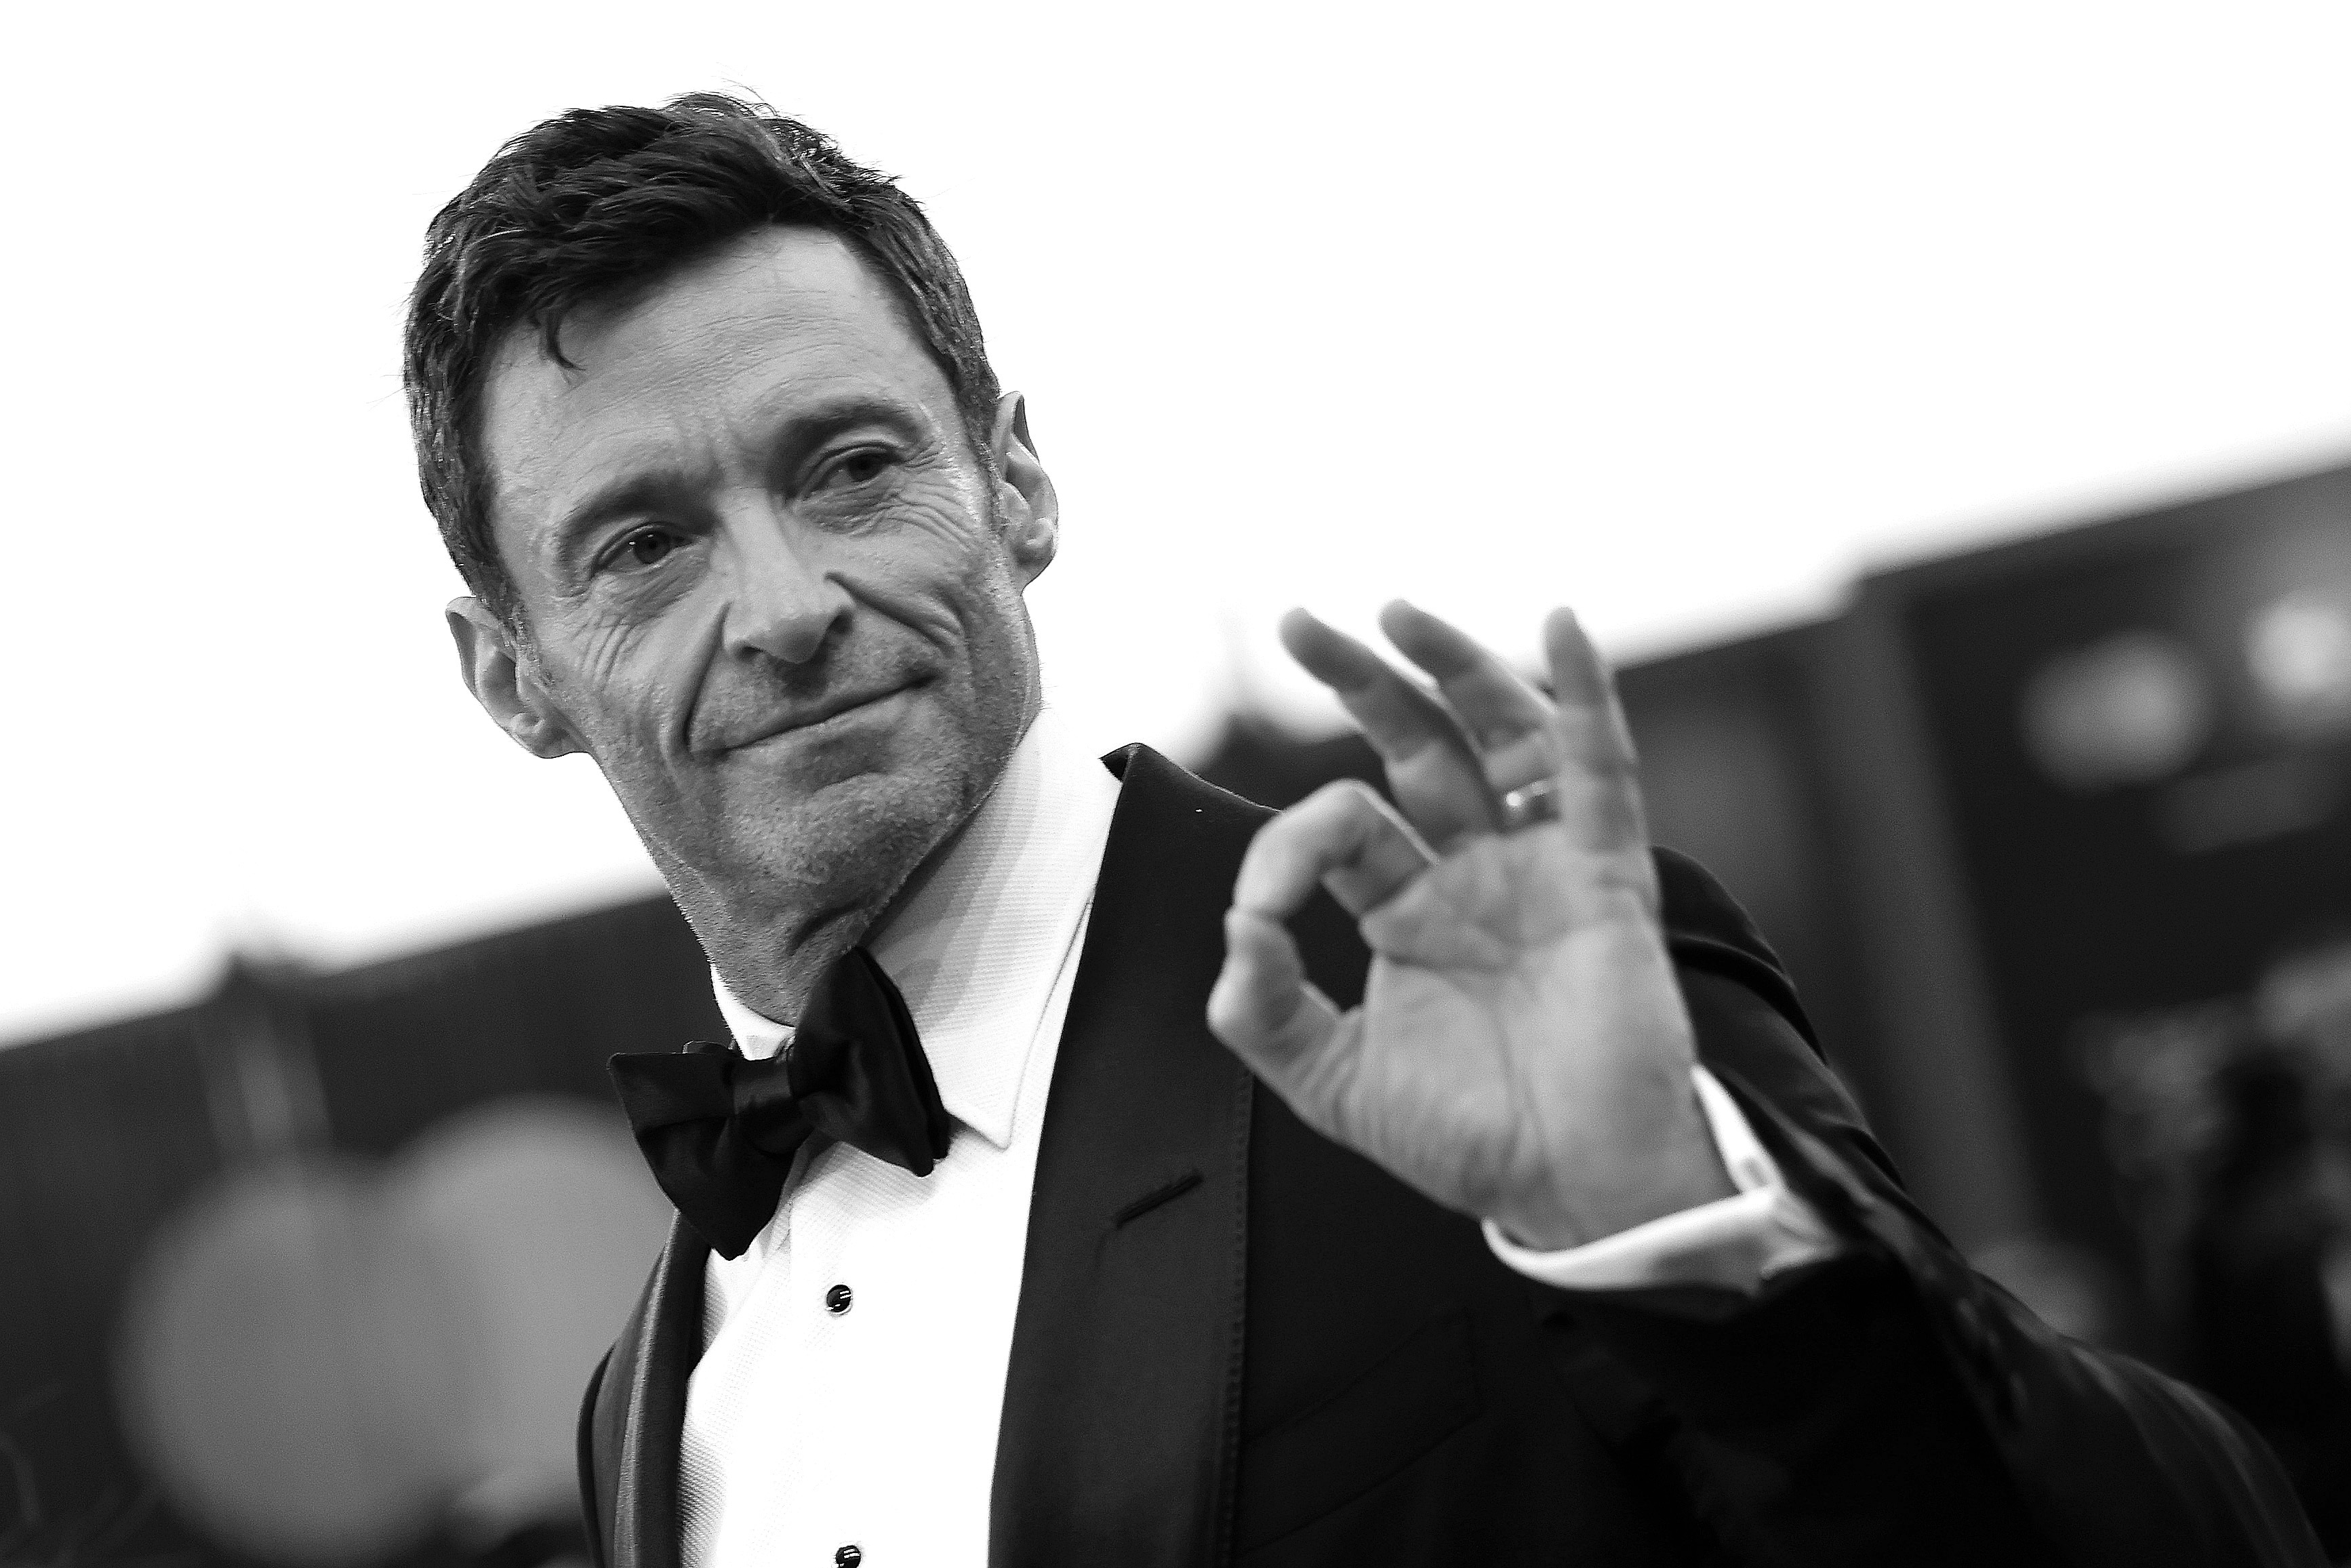 Hugh Jackman reveals the iconic movie role he turned down for Wolverine